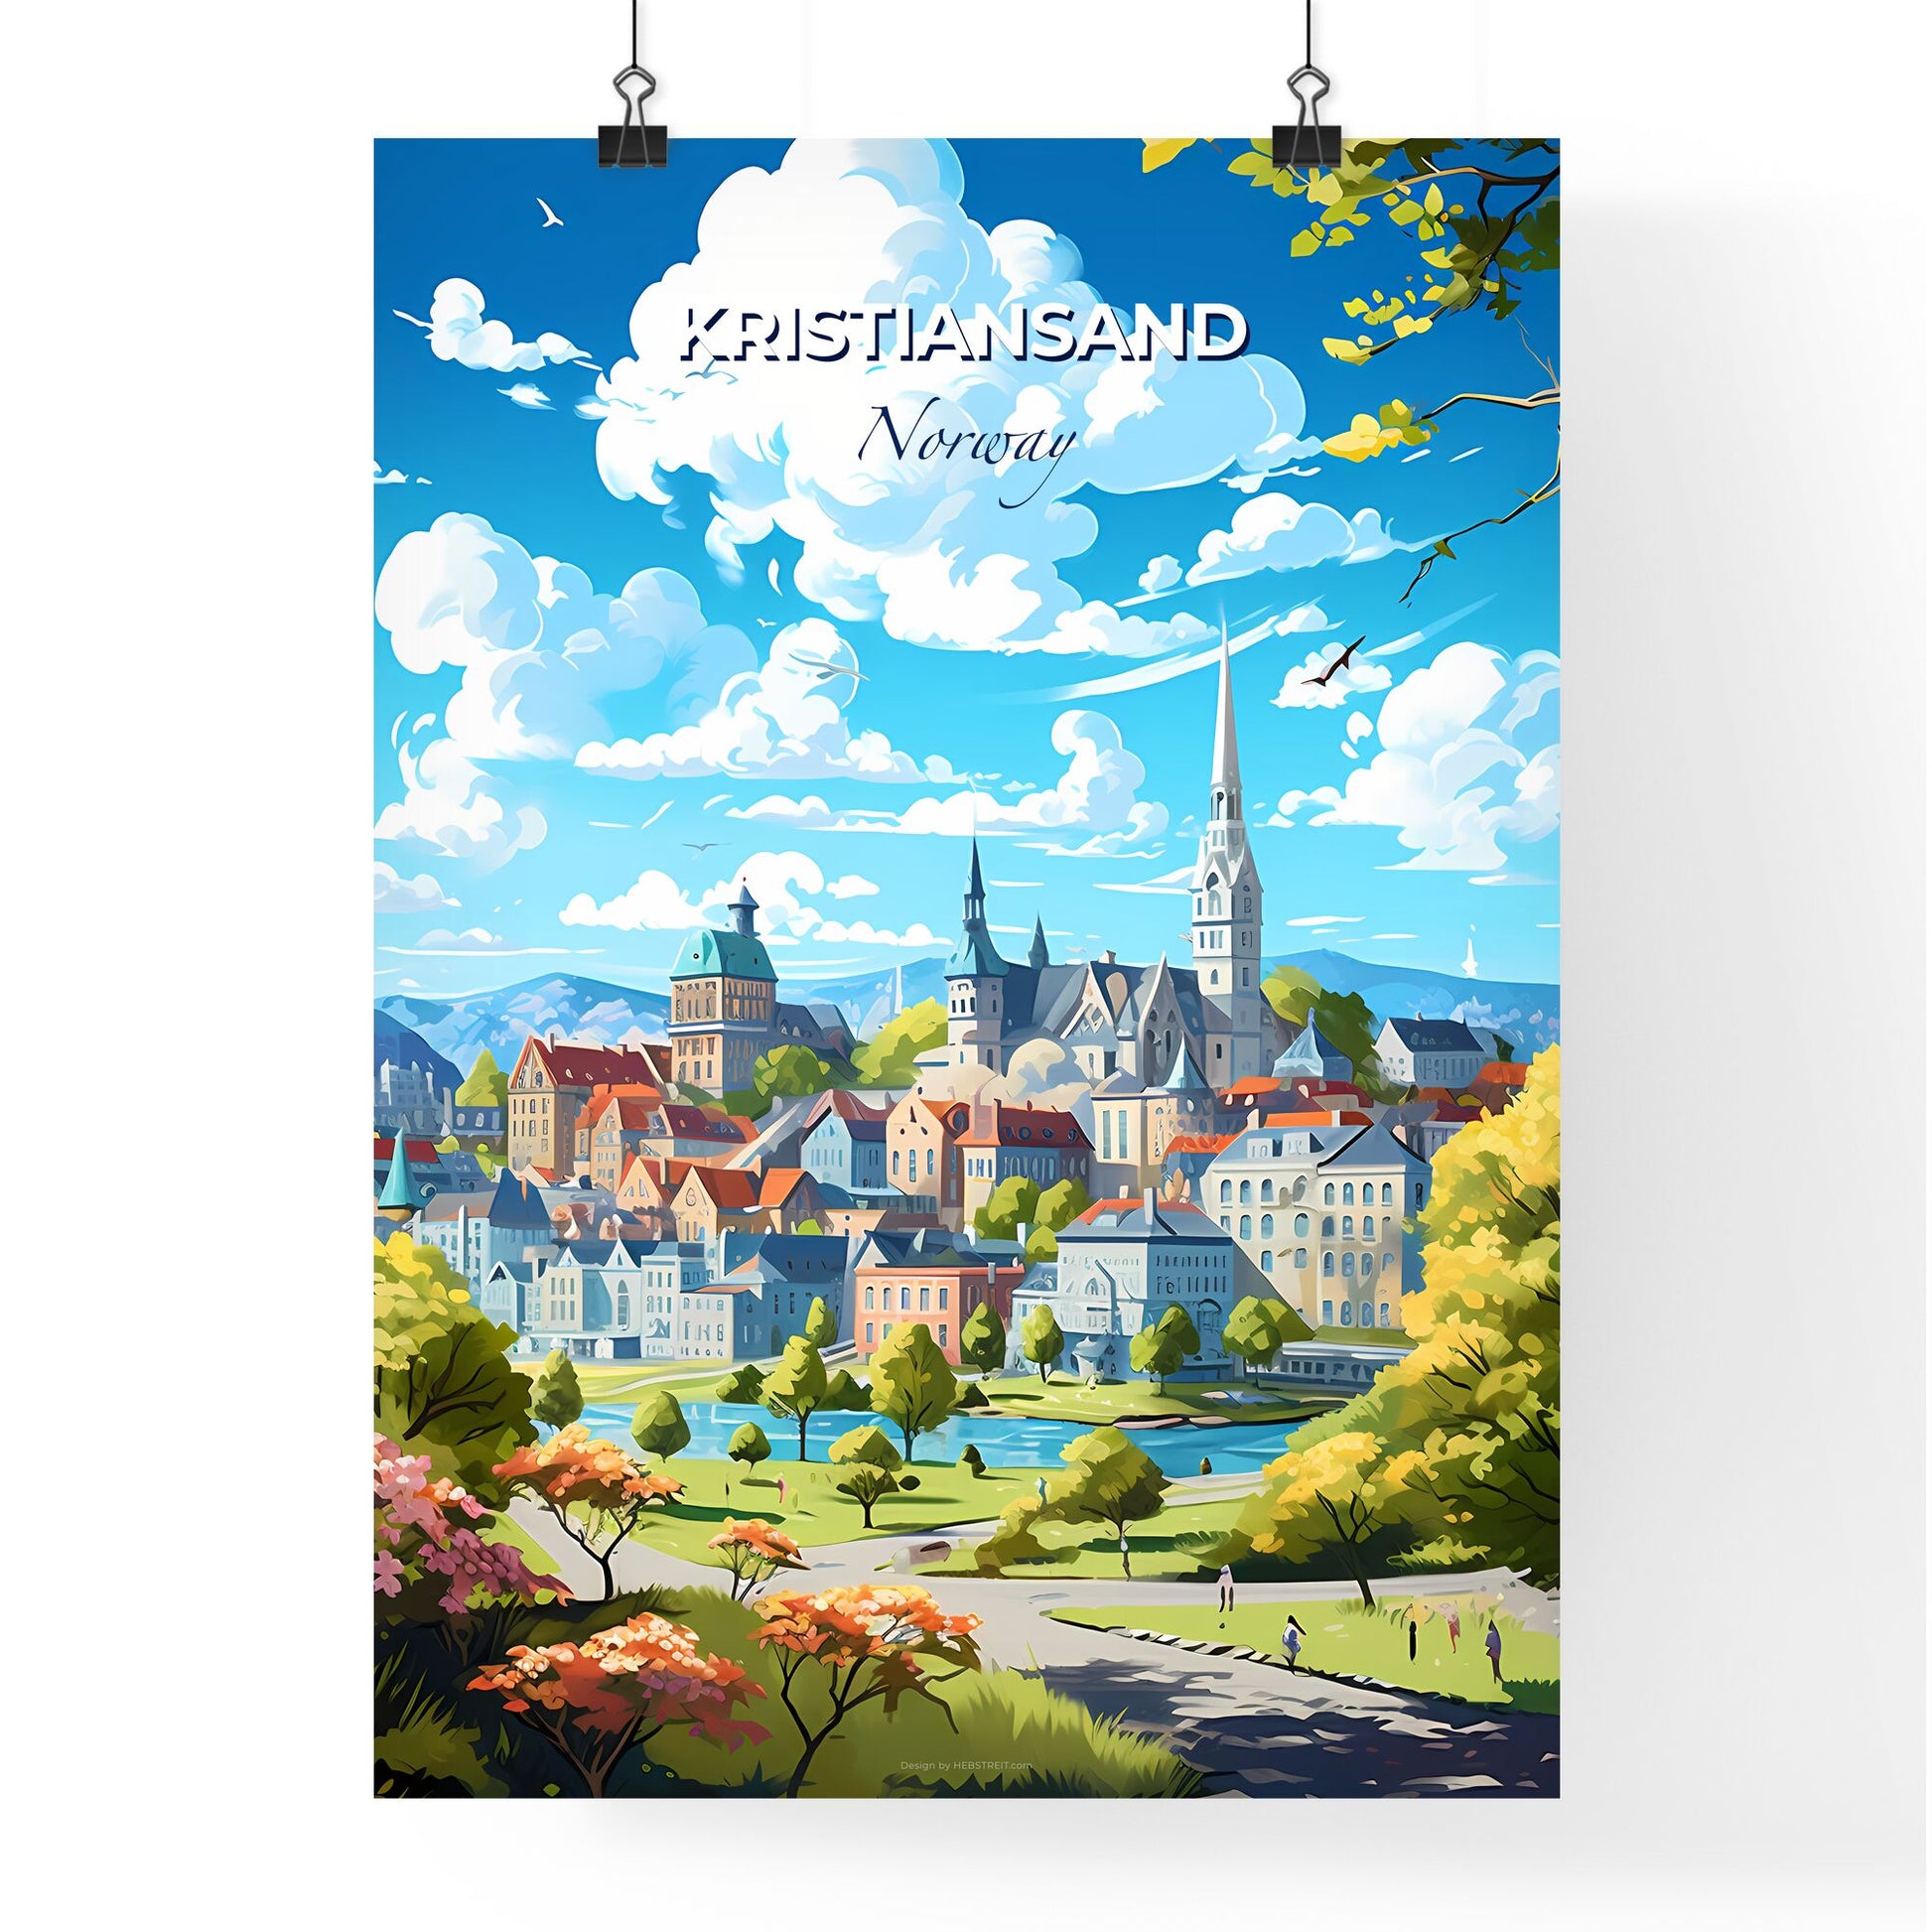 Kristiansand Norway Skyline - A City With A River And Trees - Customizable Travel Gift Default Title